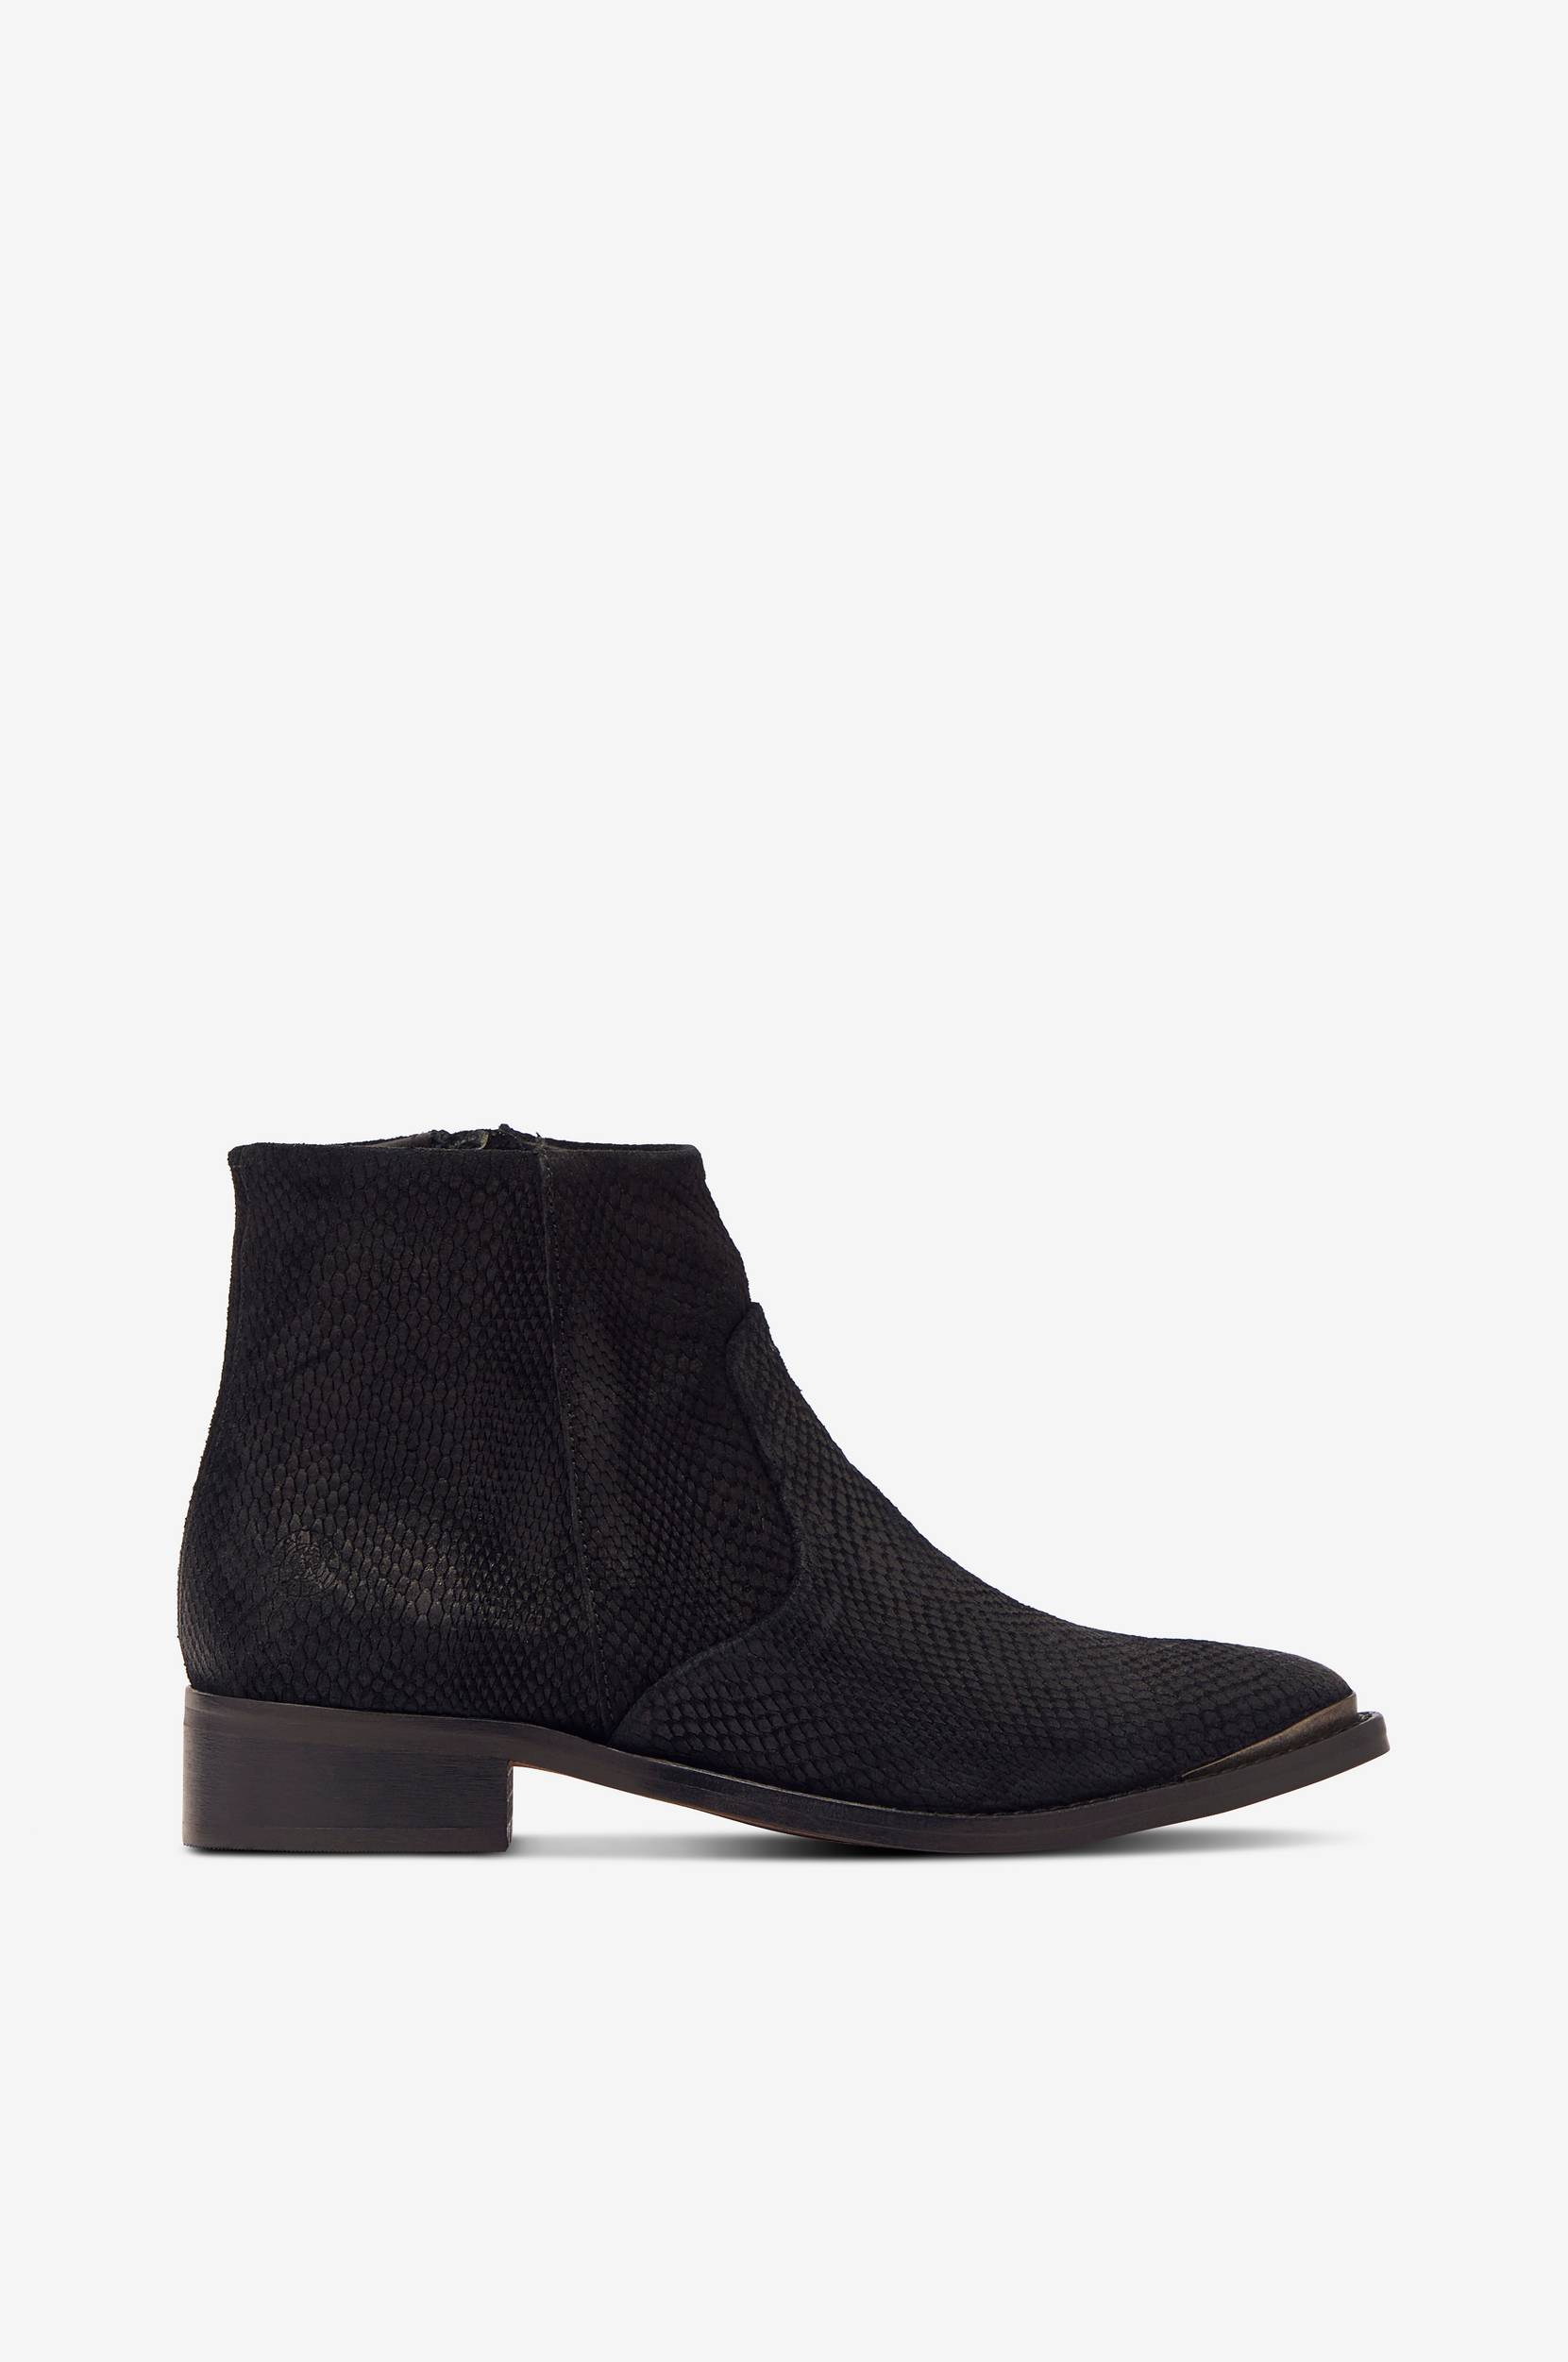 Sneaky Steve - Boots Electric W Suede  - Sort - 37